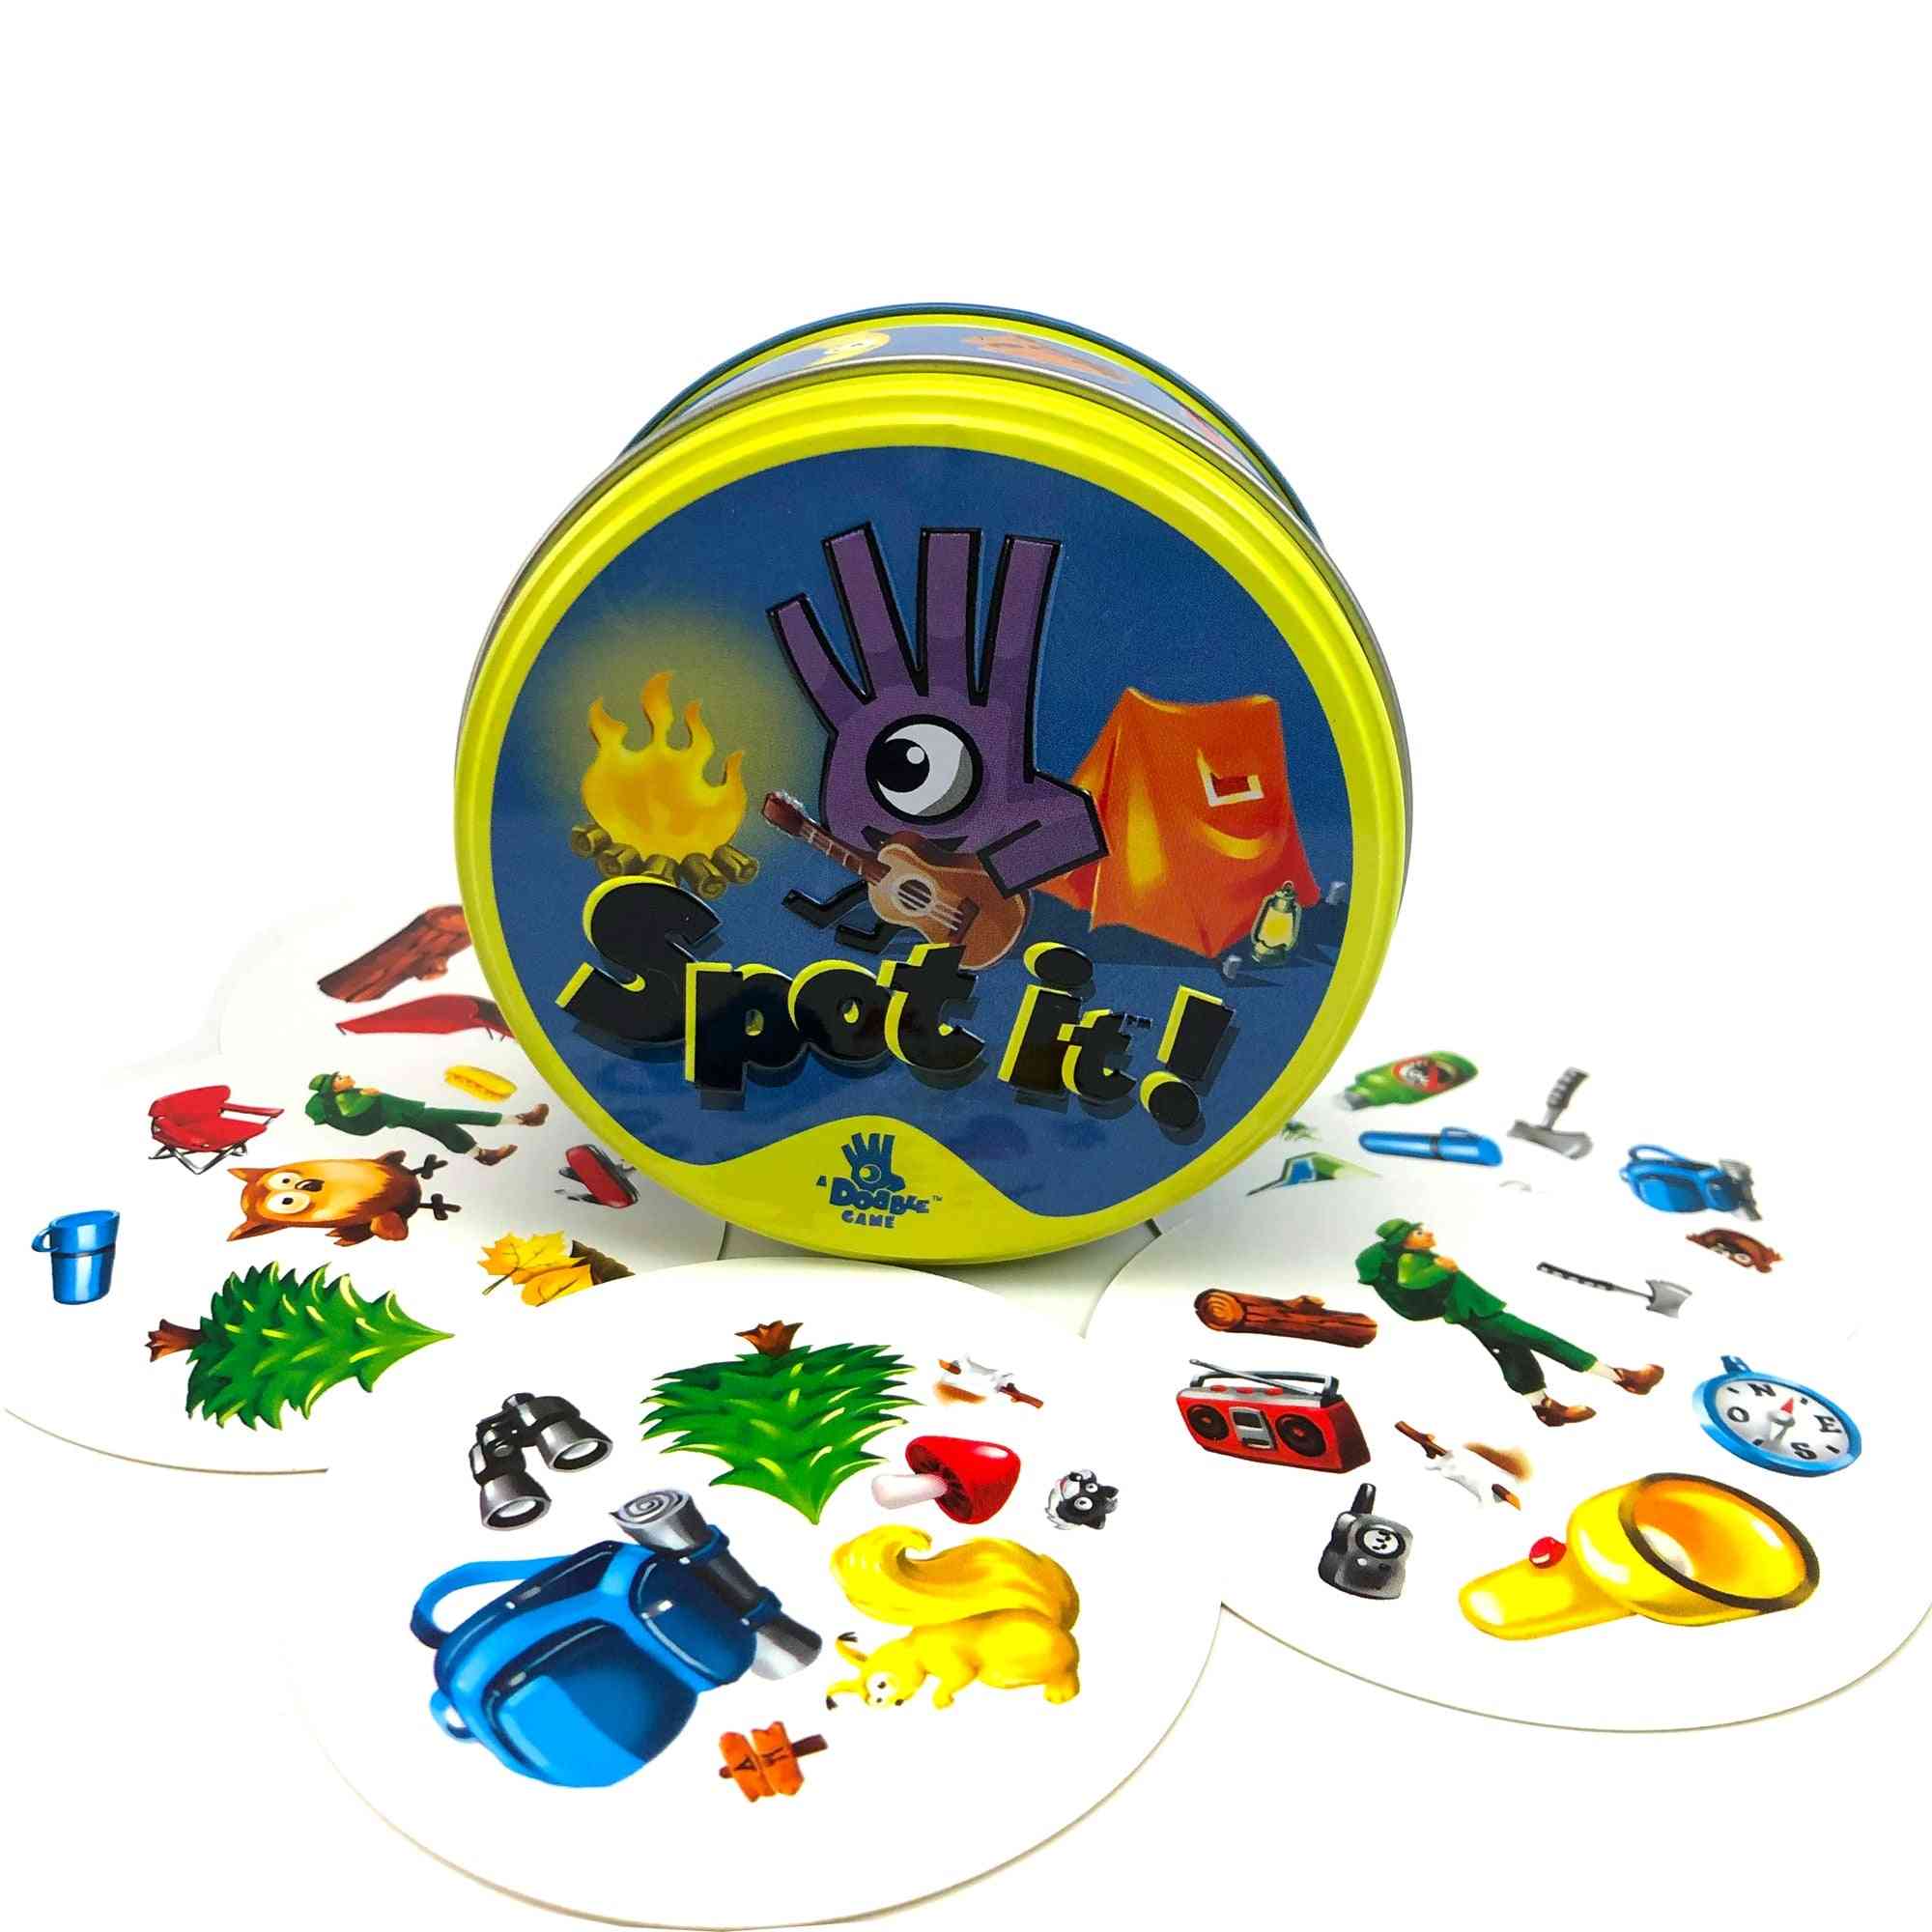 Spot It Dobble Cards Game, Animals, Numbers, Kids Sports, Gone Camping Alphabets